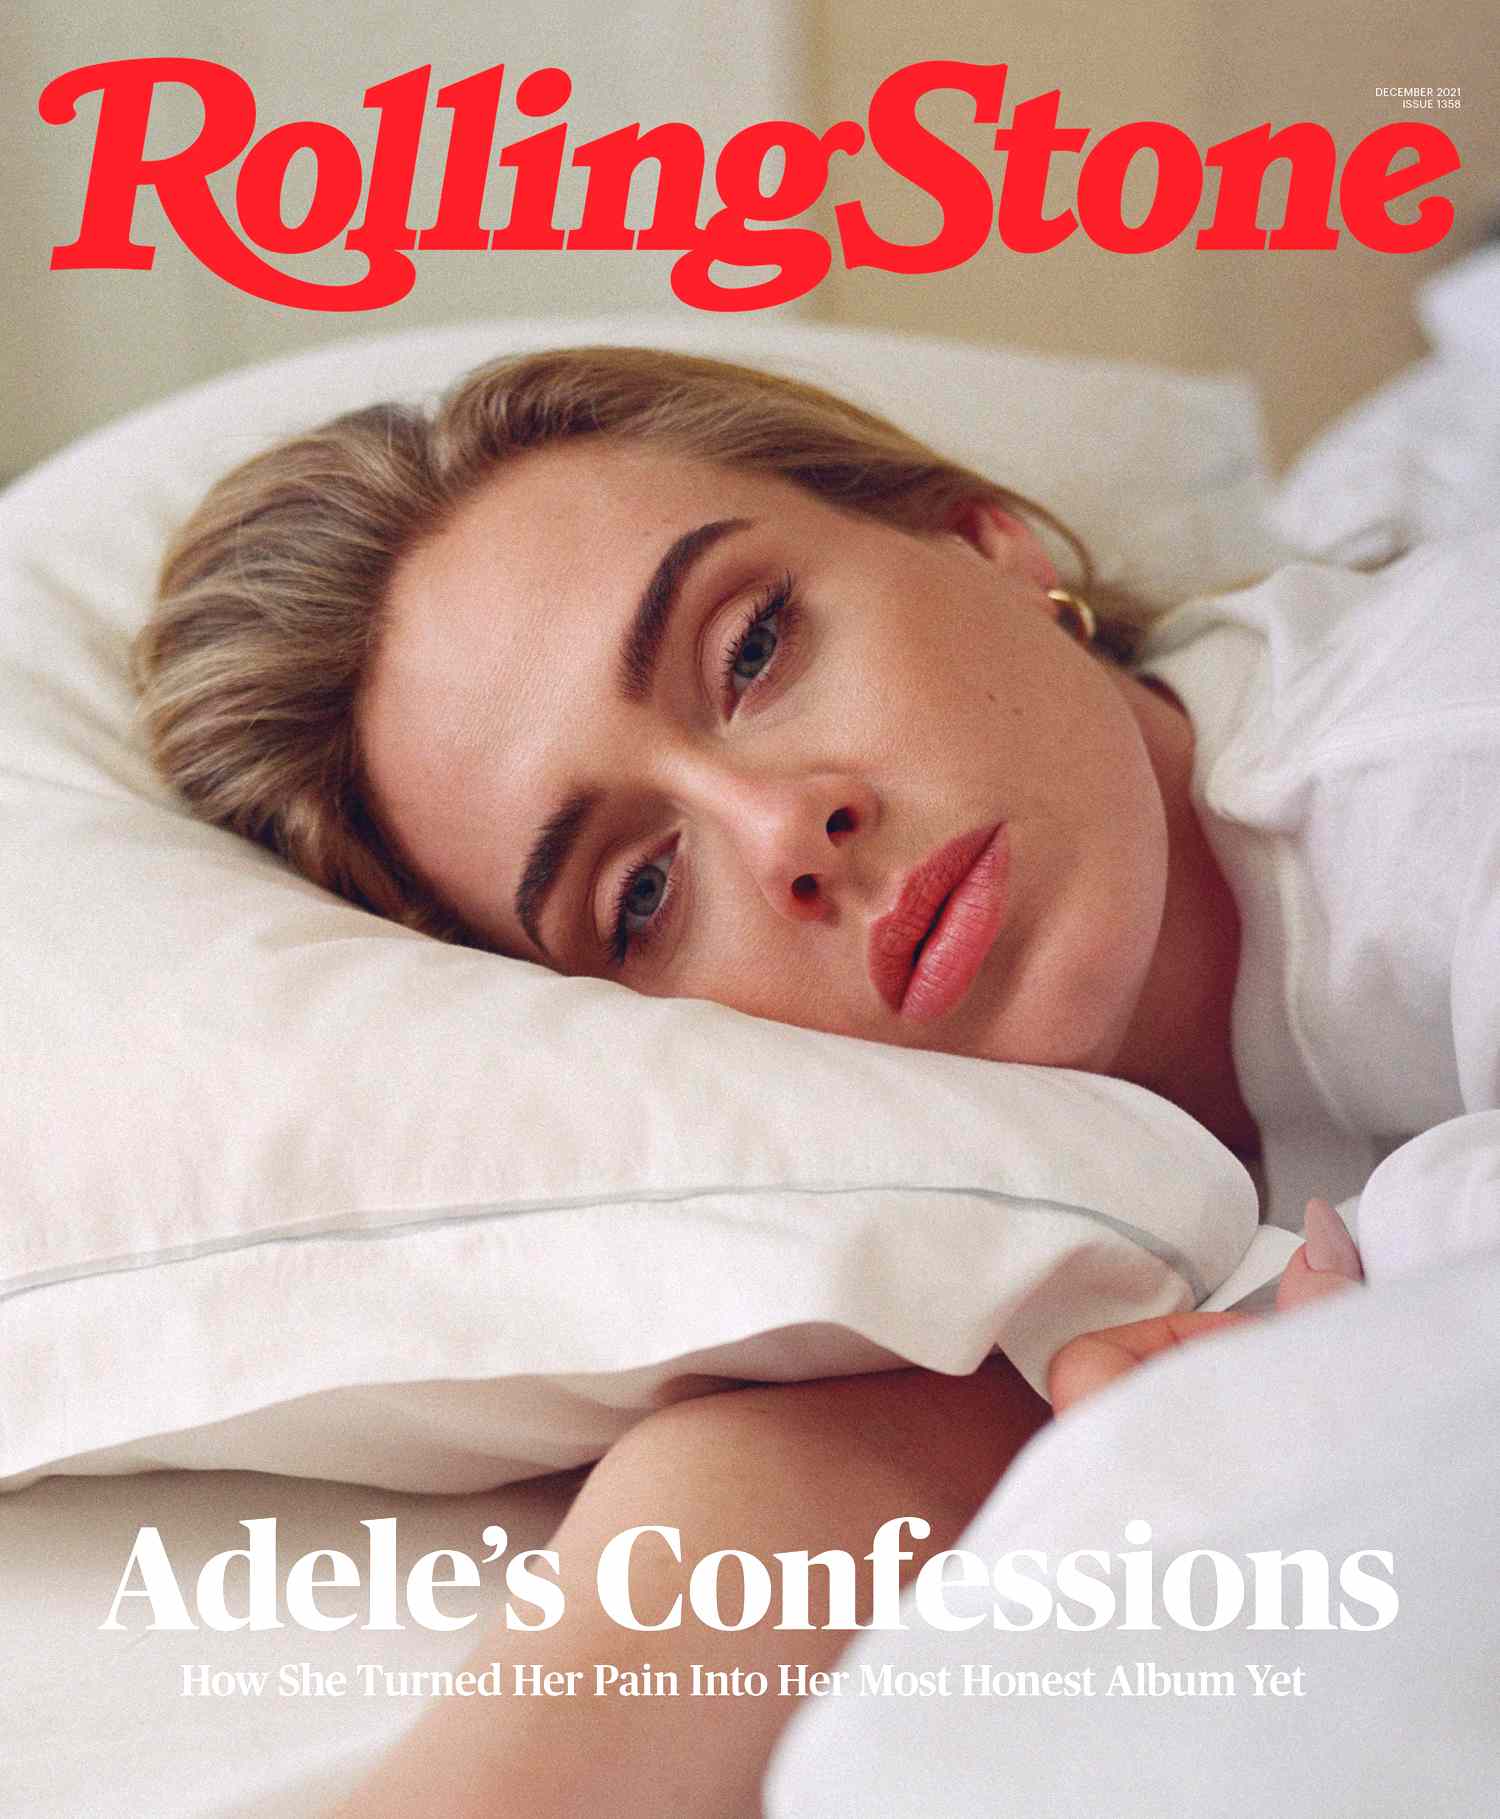 Adele Covers the December Issue of Rolling Stone